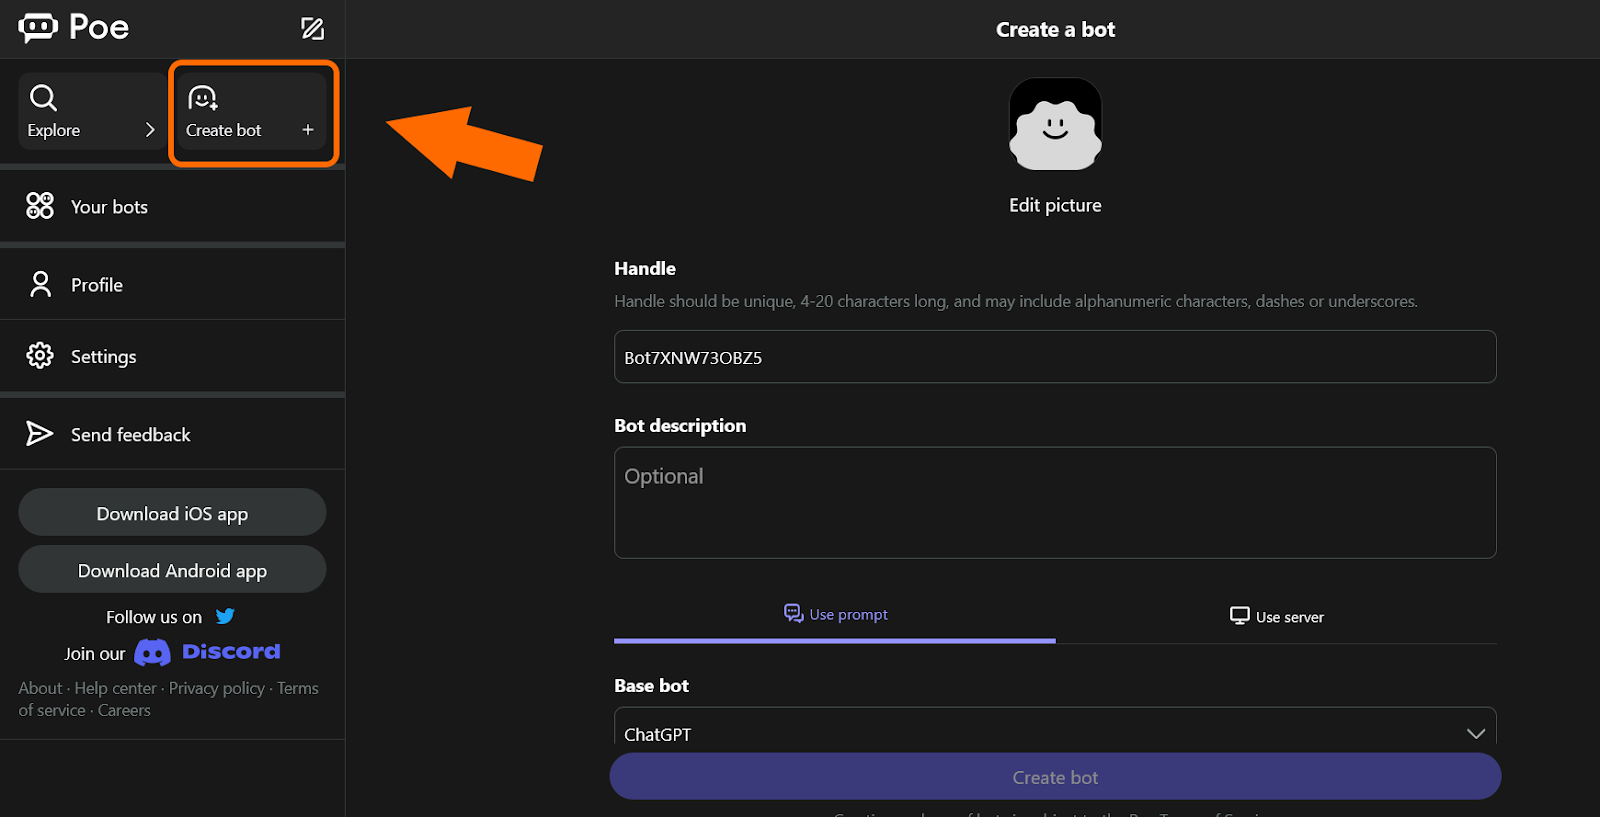 Click on the Create bot button on the lefthand panel